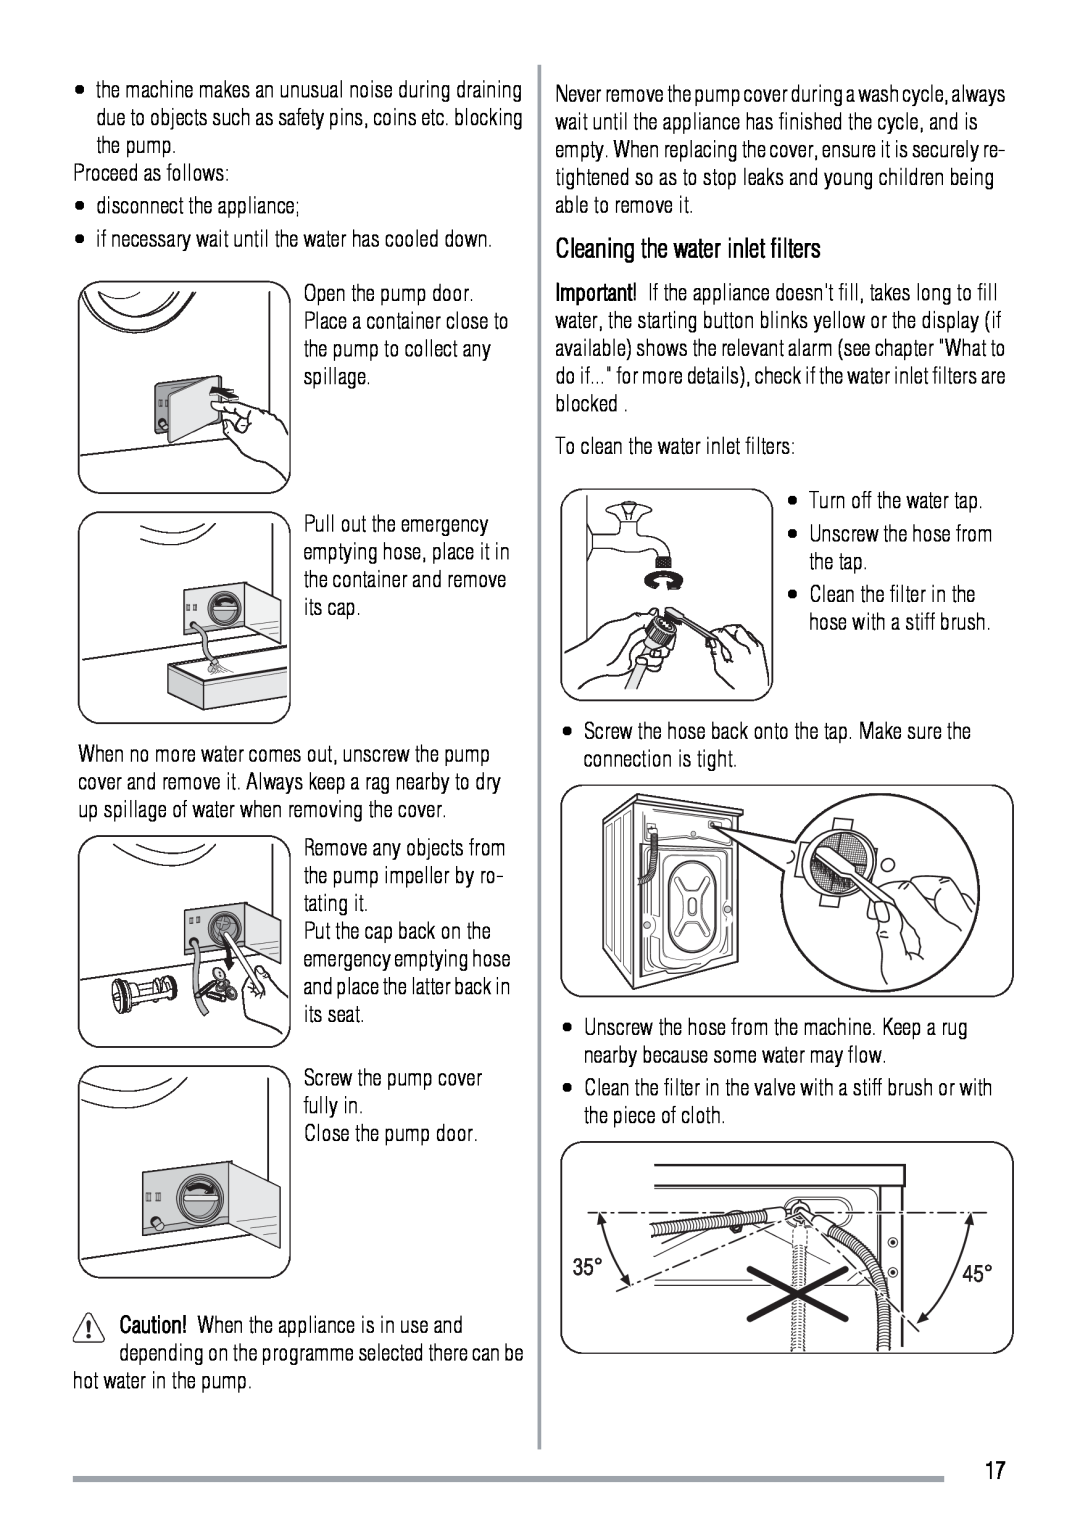 Zanussi 192994960-00-202009 user manual Cleaning the water inlet filters, Proceed as follows disconnect the appliance 